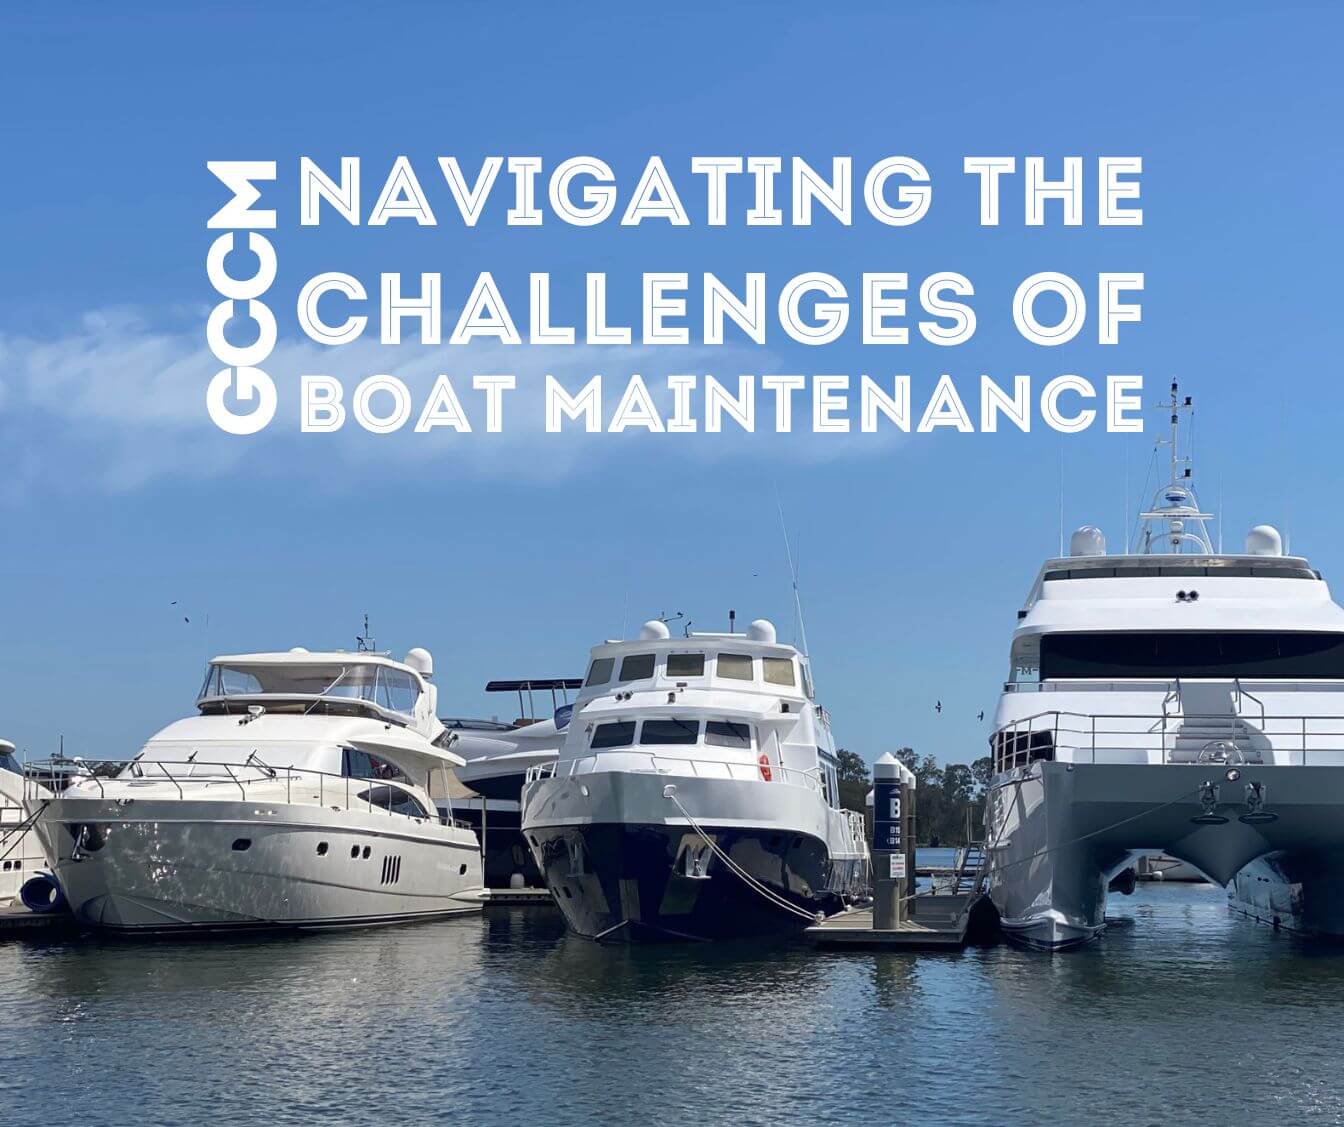 Navigating the Challenges of Boat Maintenance